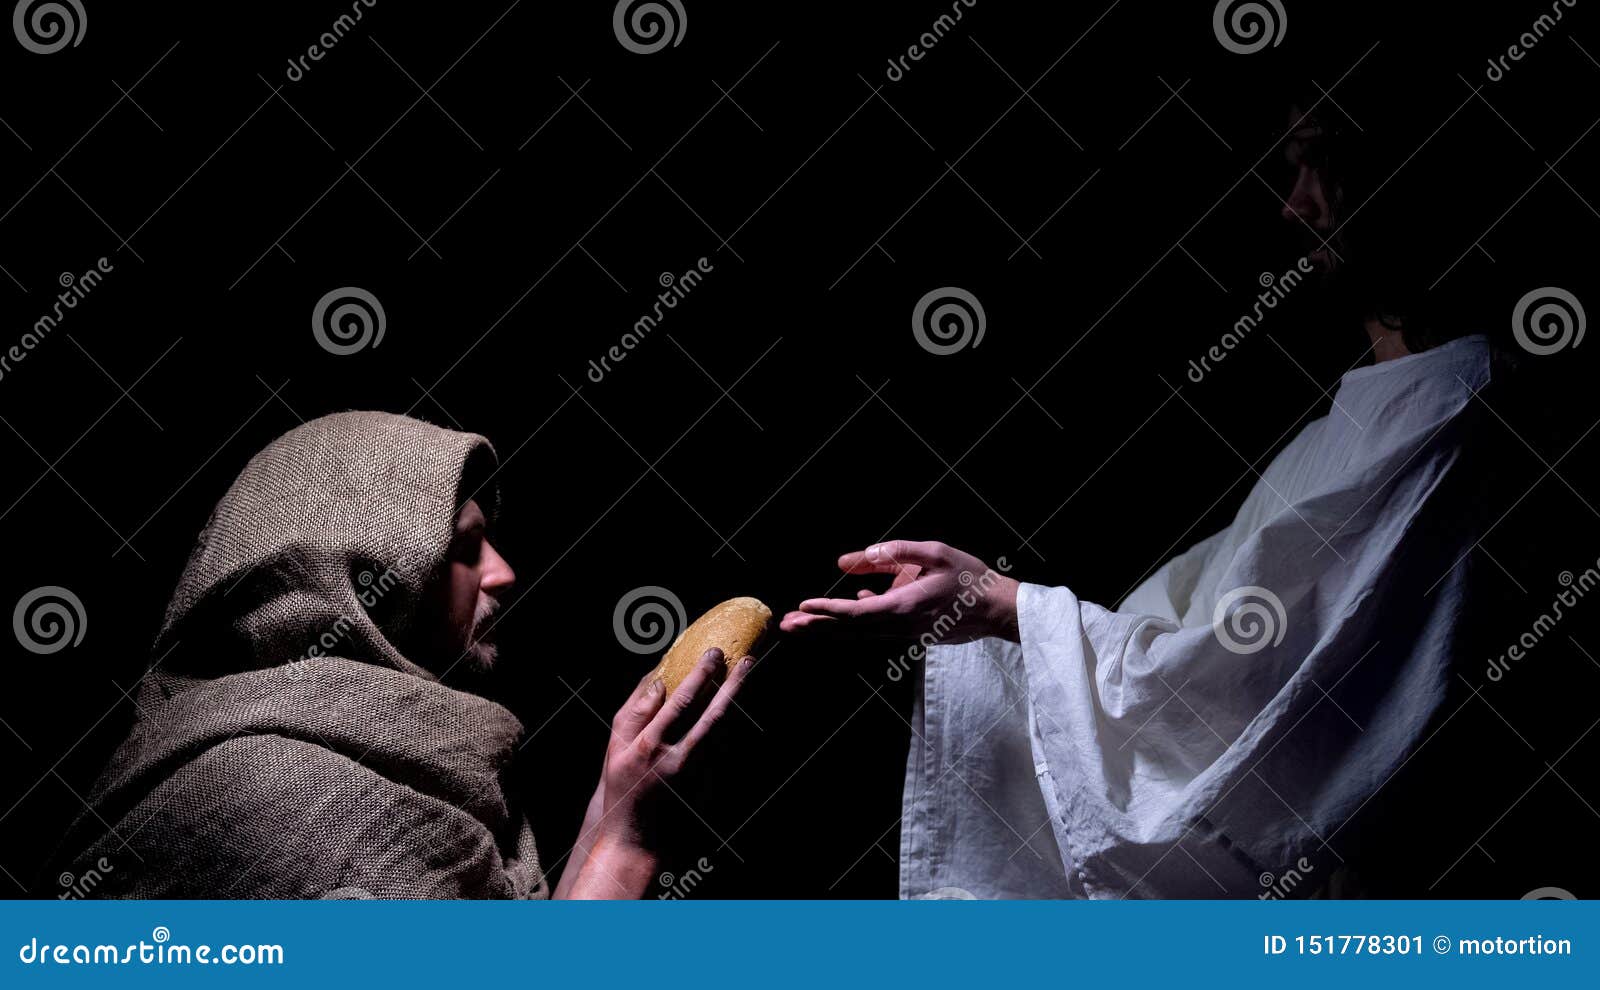 mercy jesus in crown of thorns giving bread for hungry homeless man, miracle